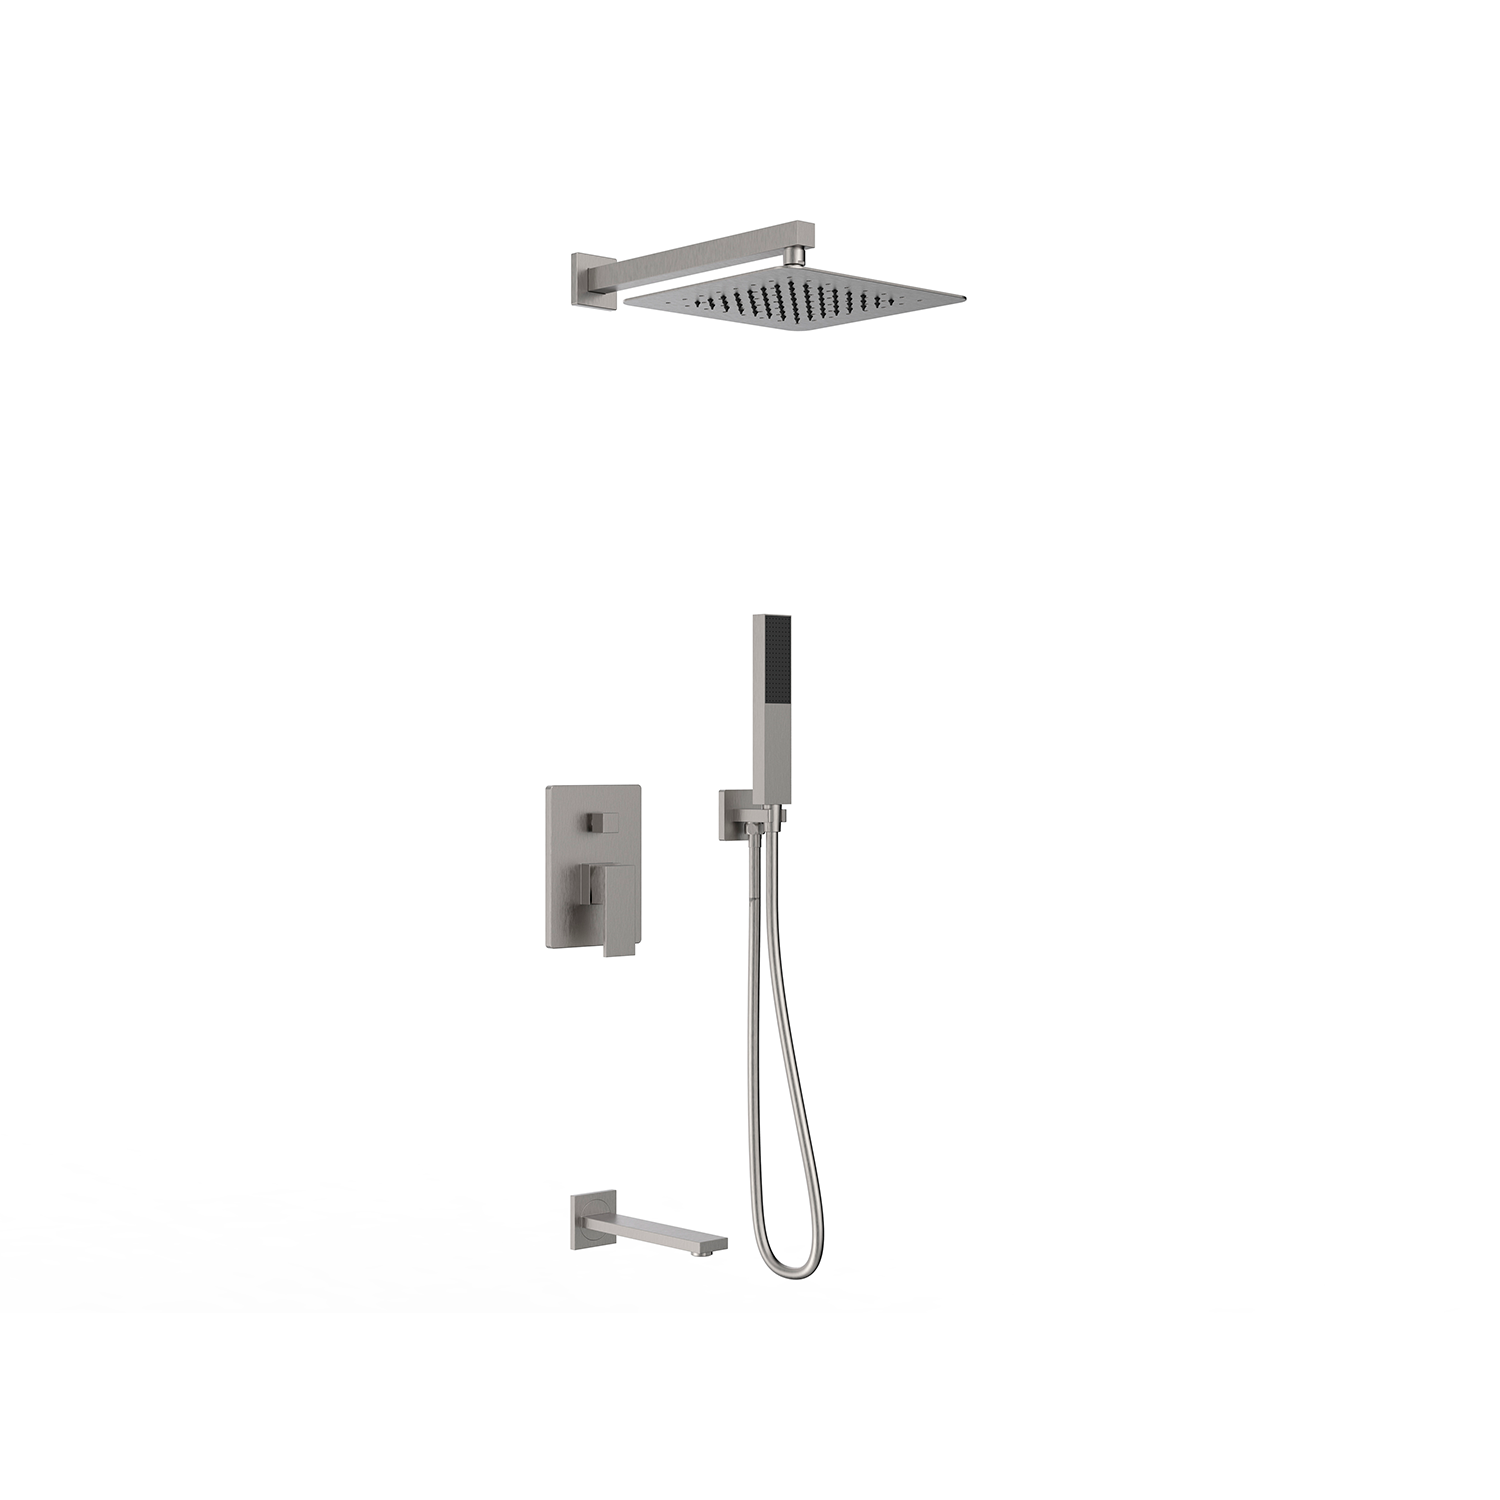 DAX Square 3 Way Shower System with Hand Shower Brushed Nickel Finish (DAX-6563A-BN)